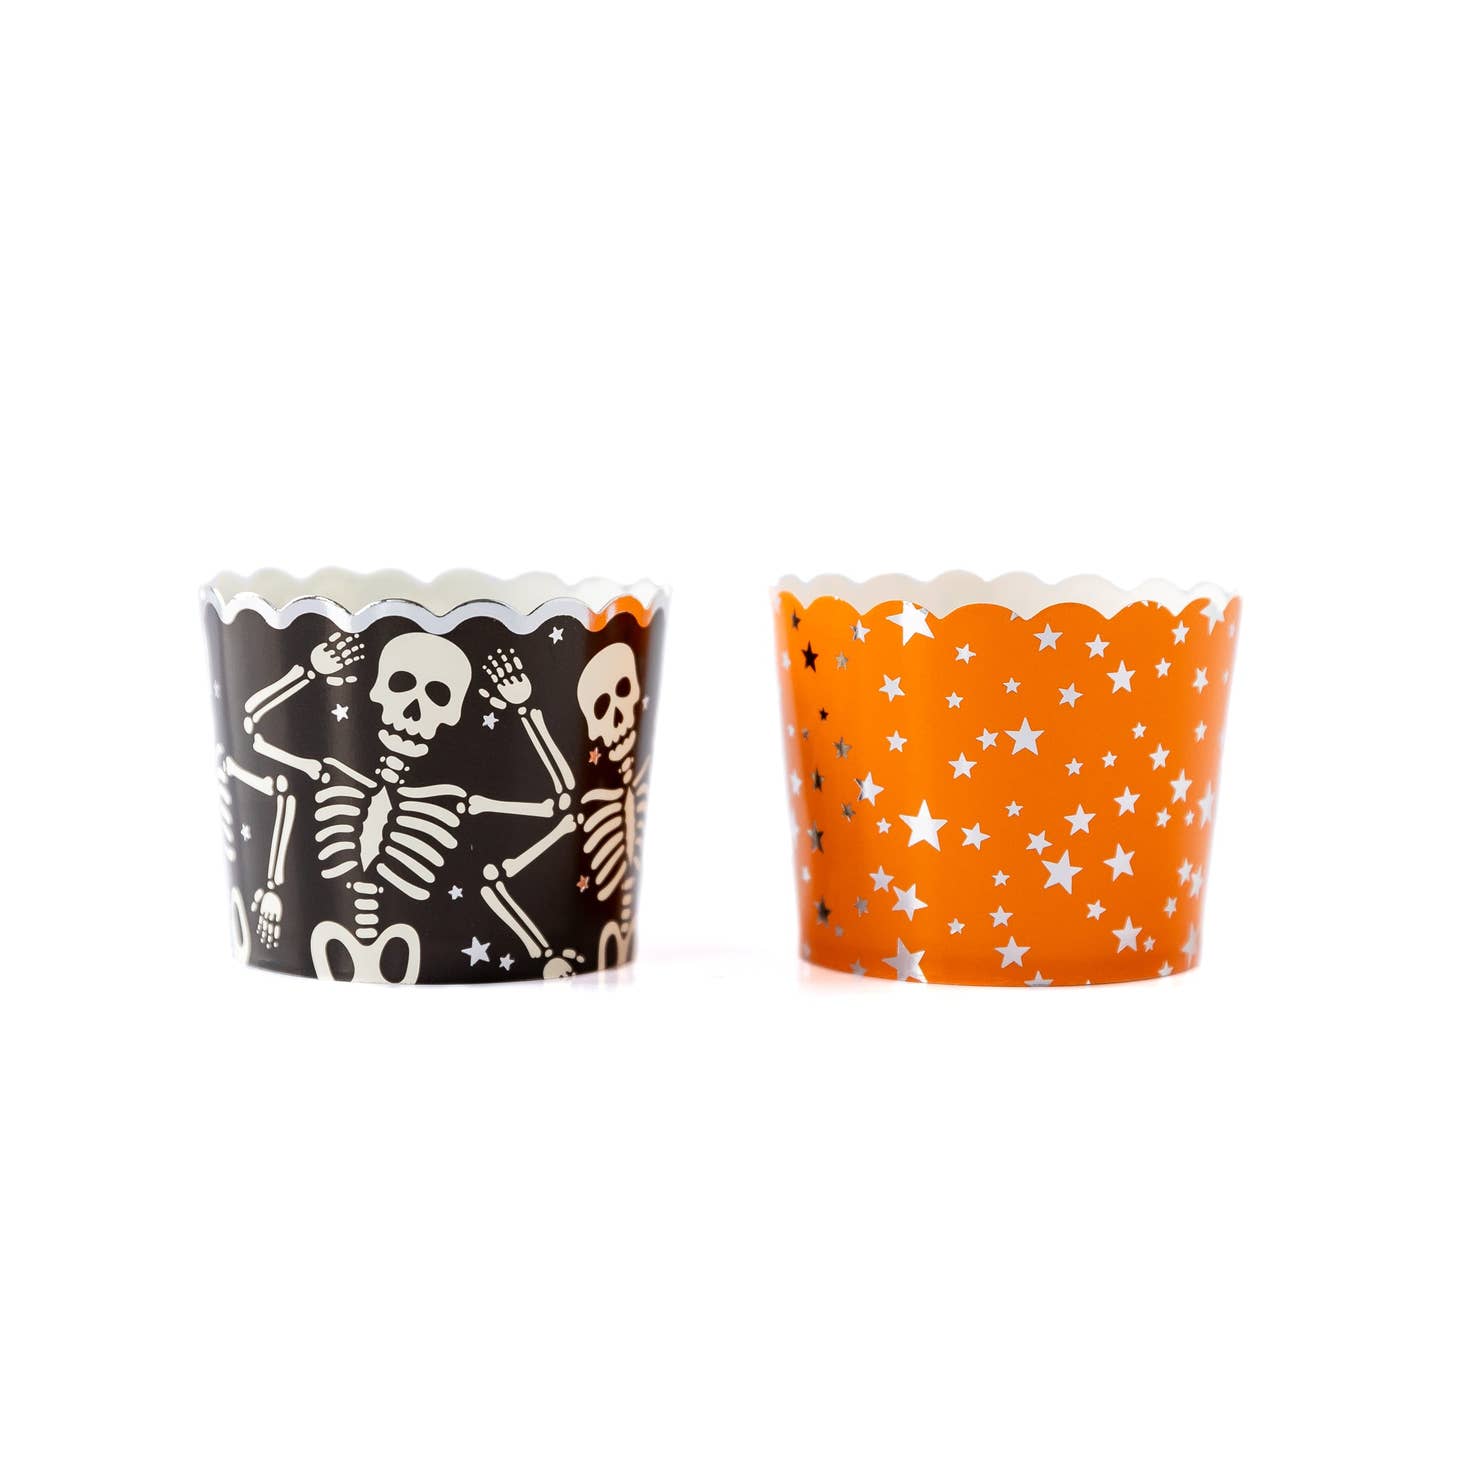 Silver Foil Spooky Skeletons Food Cups from Favorite Little Things